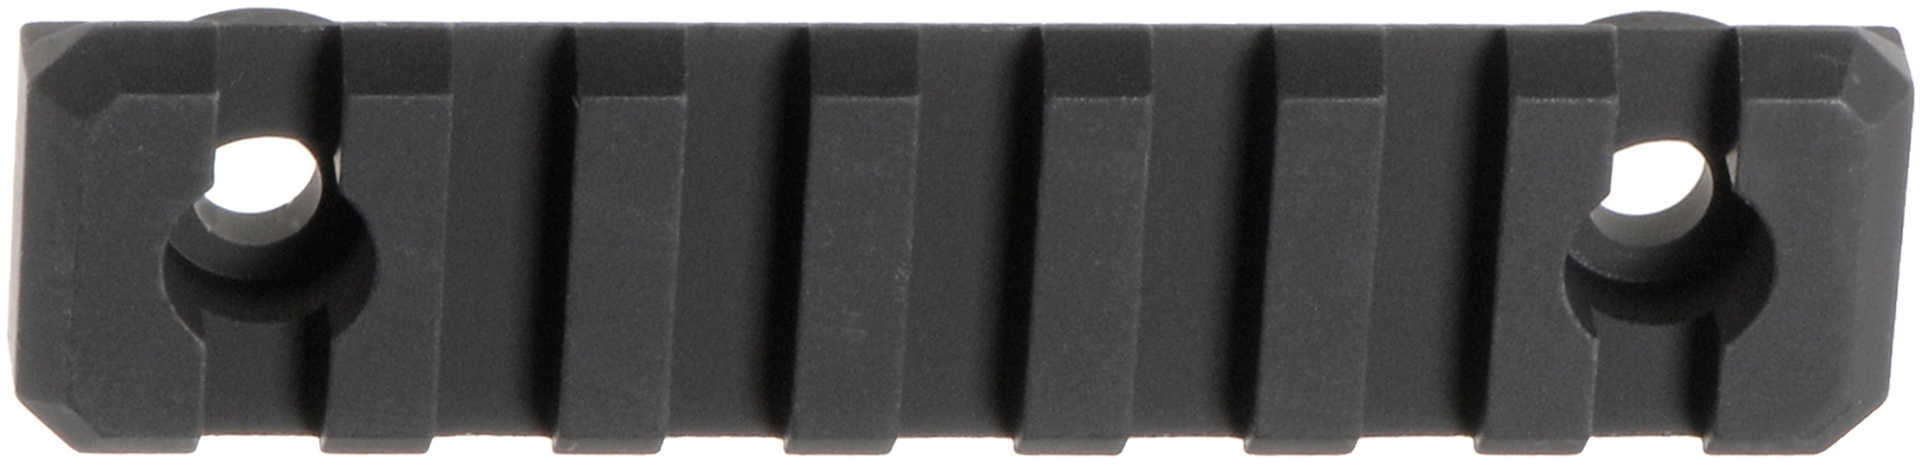 Troy Rail Section 3.2" Black Quick-Attach